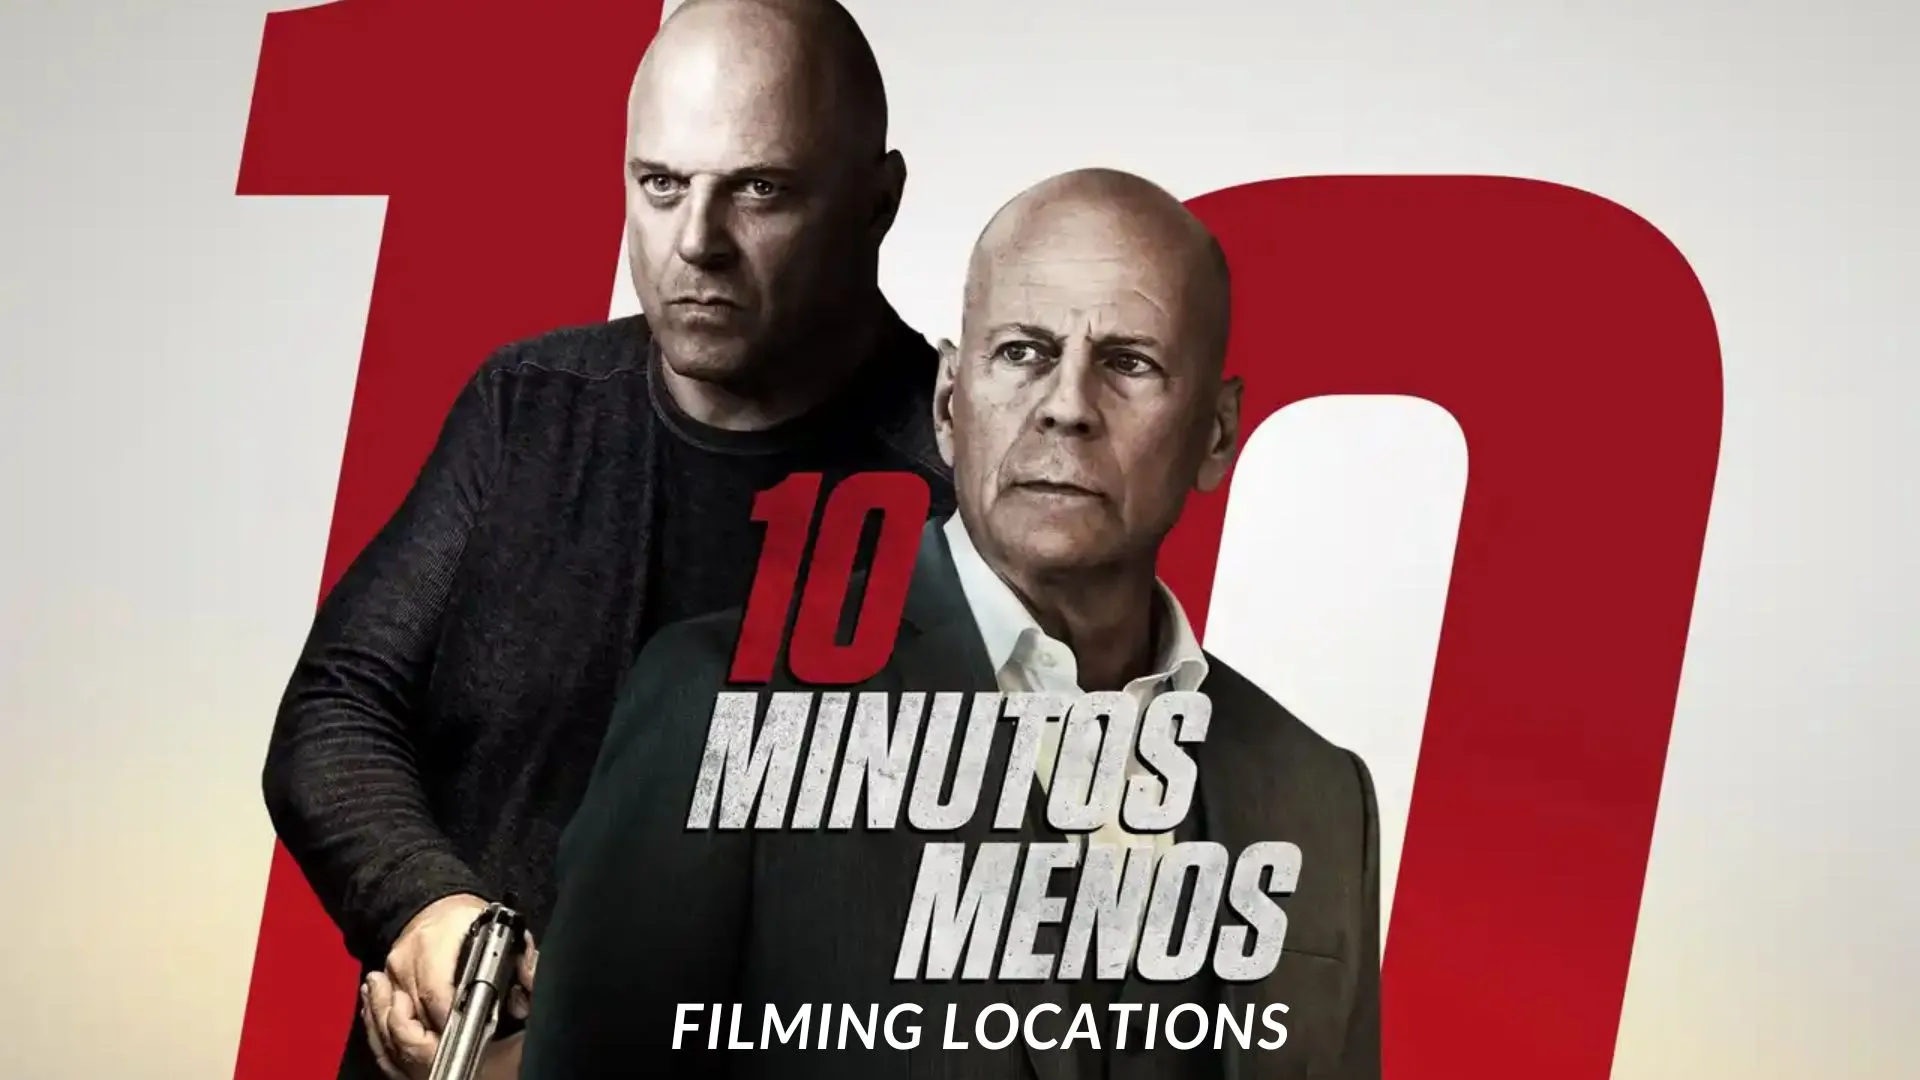 10 Minutes Gone Filming Locations